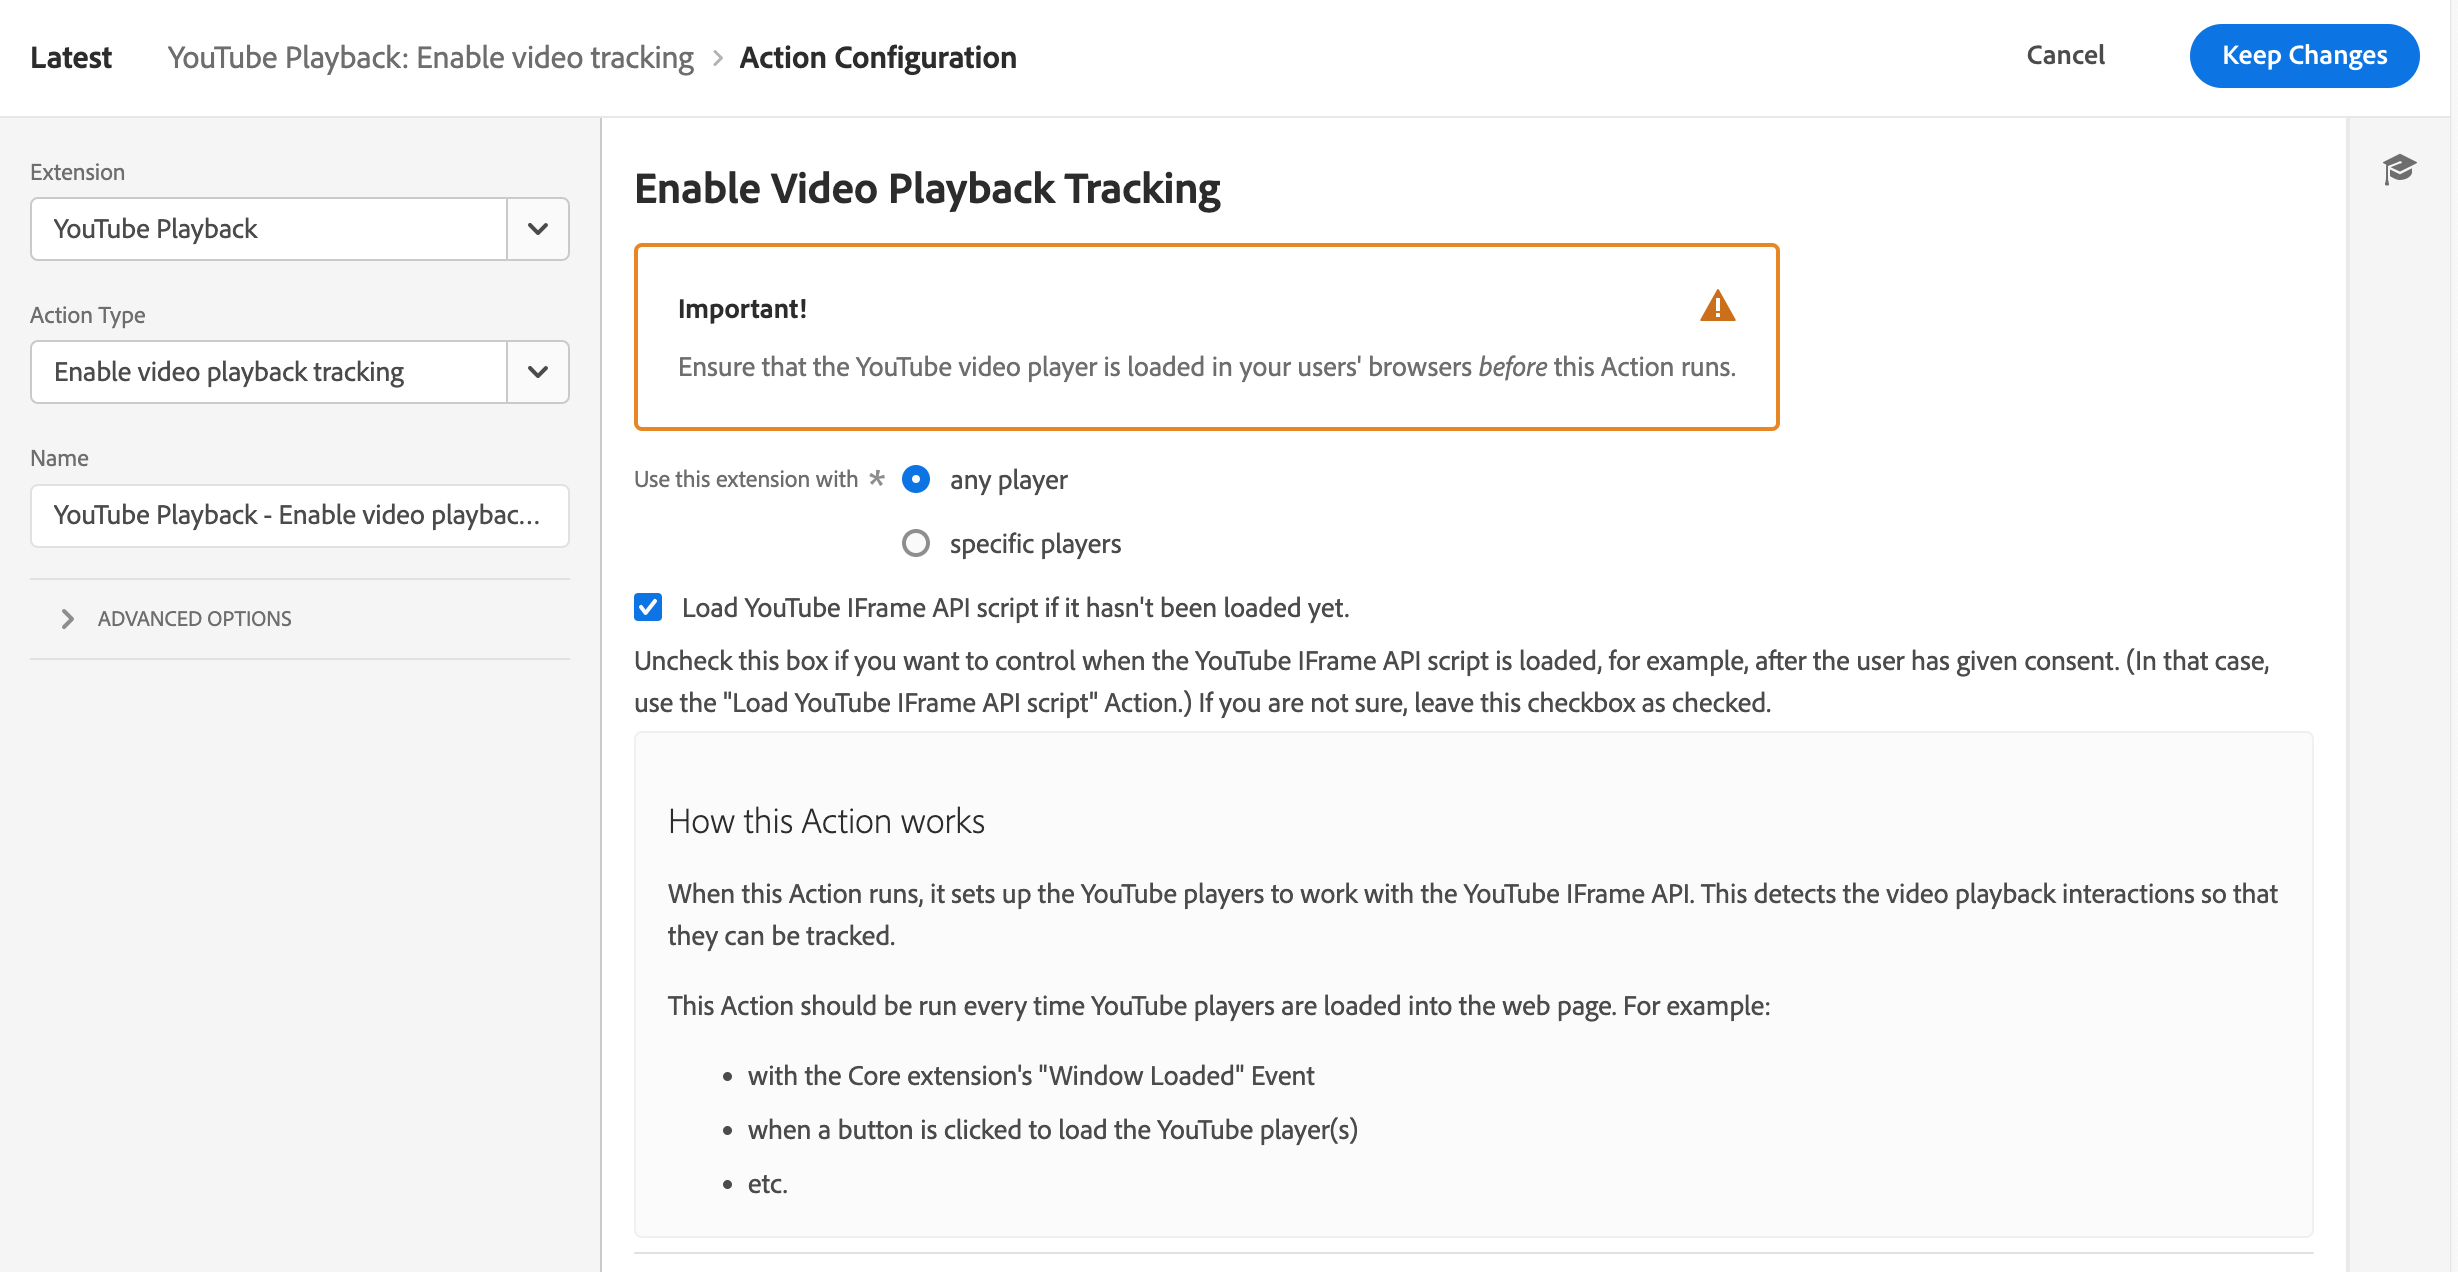 [Rule: Enable video tracking | Action: YouTube Playback > Enable video playback tracking]